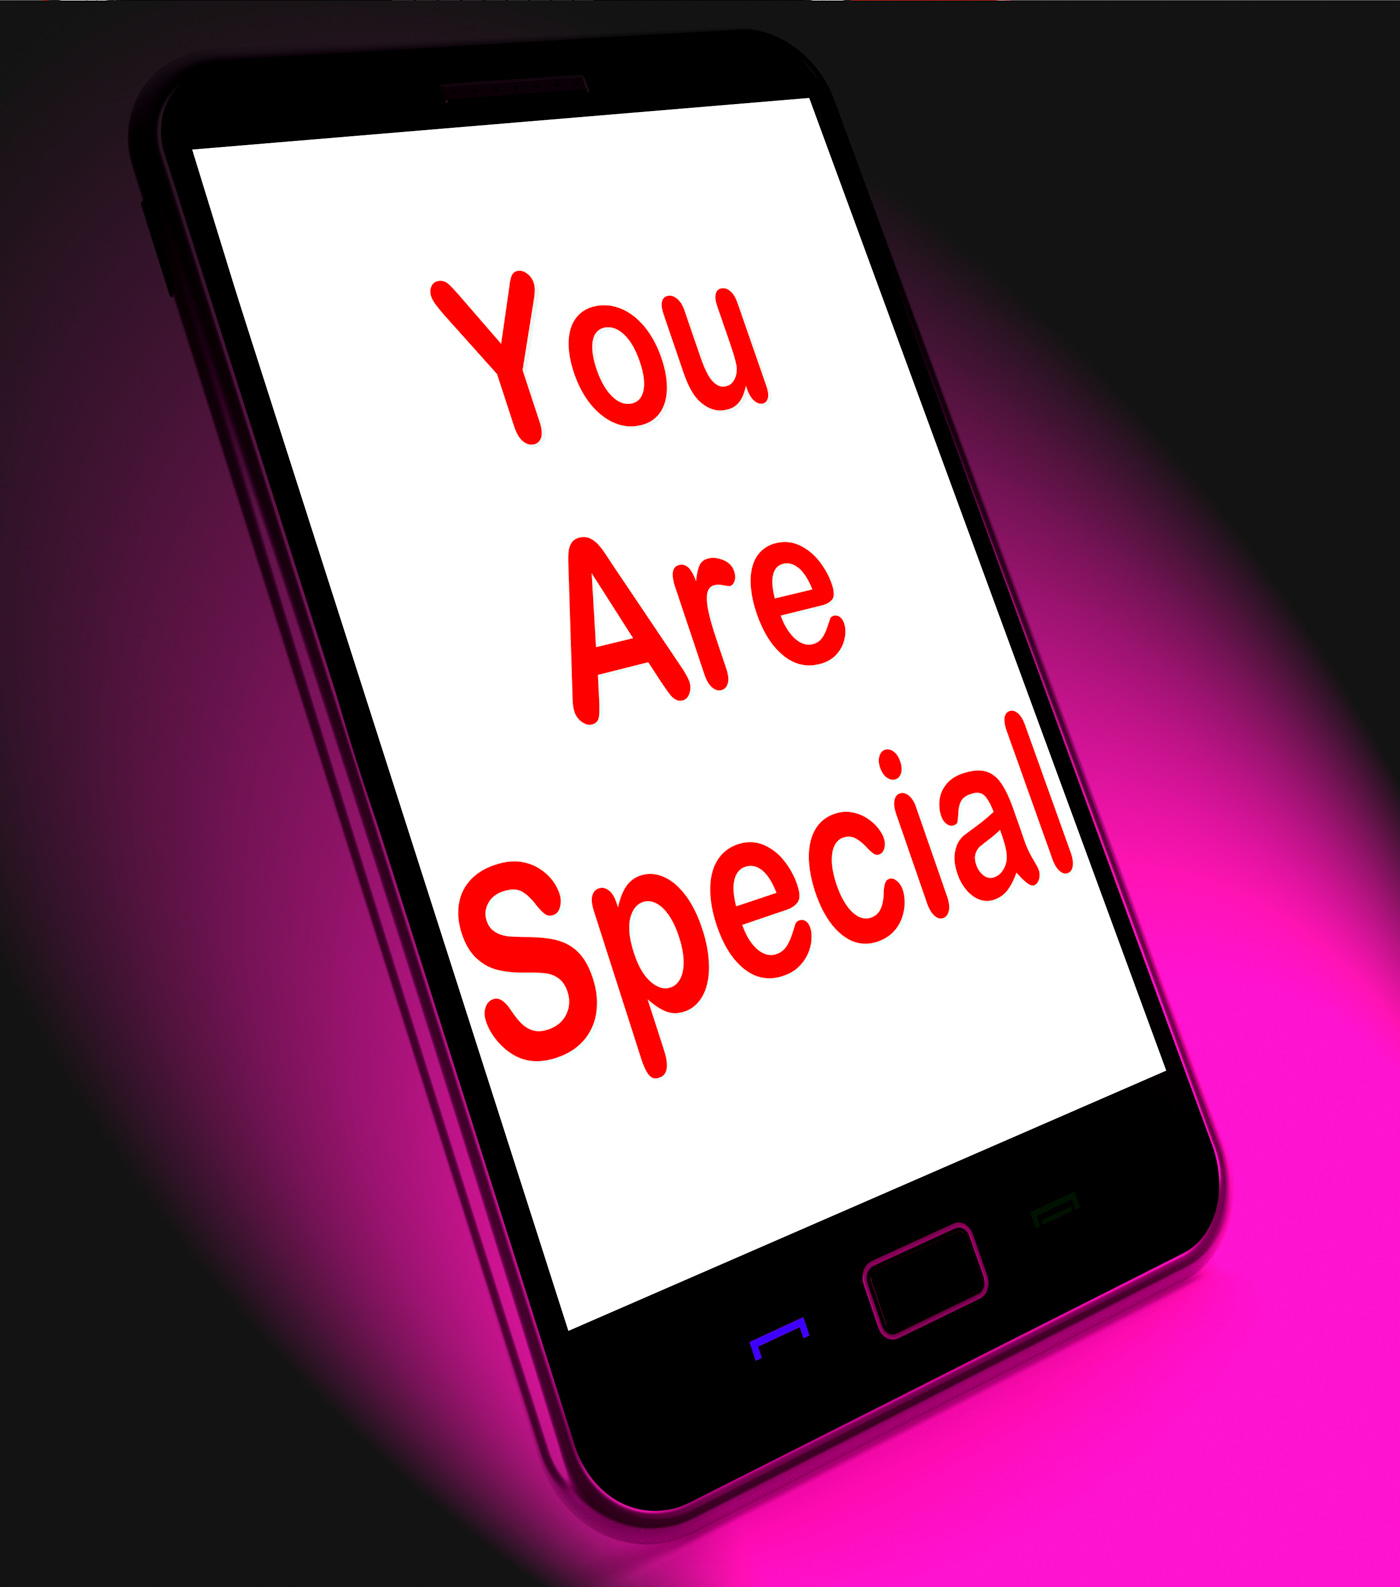 You are special on mobile means love romance or idiot photo